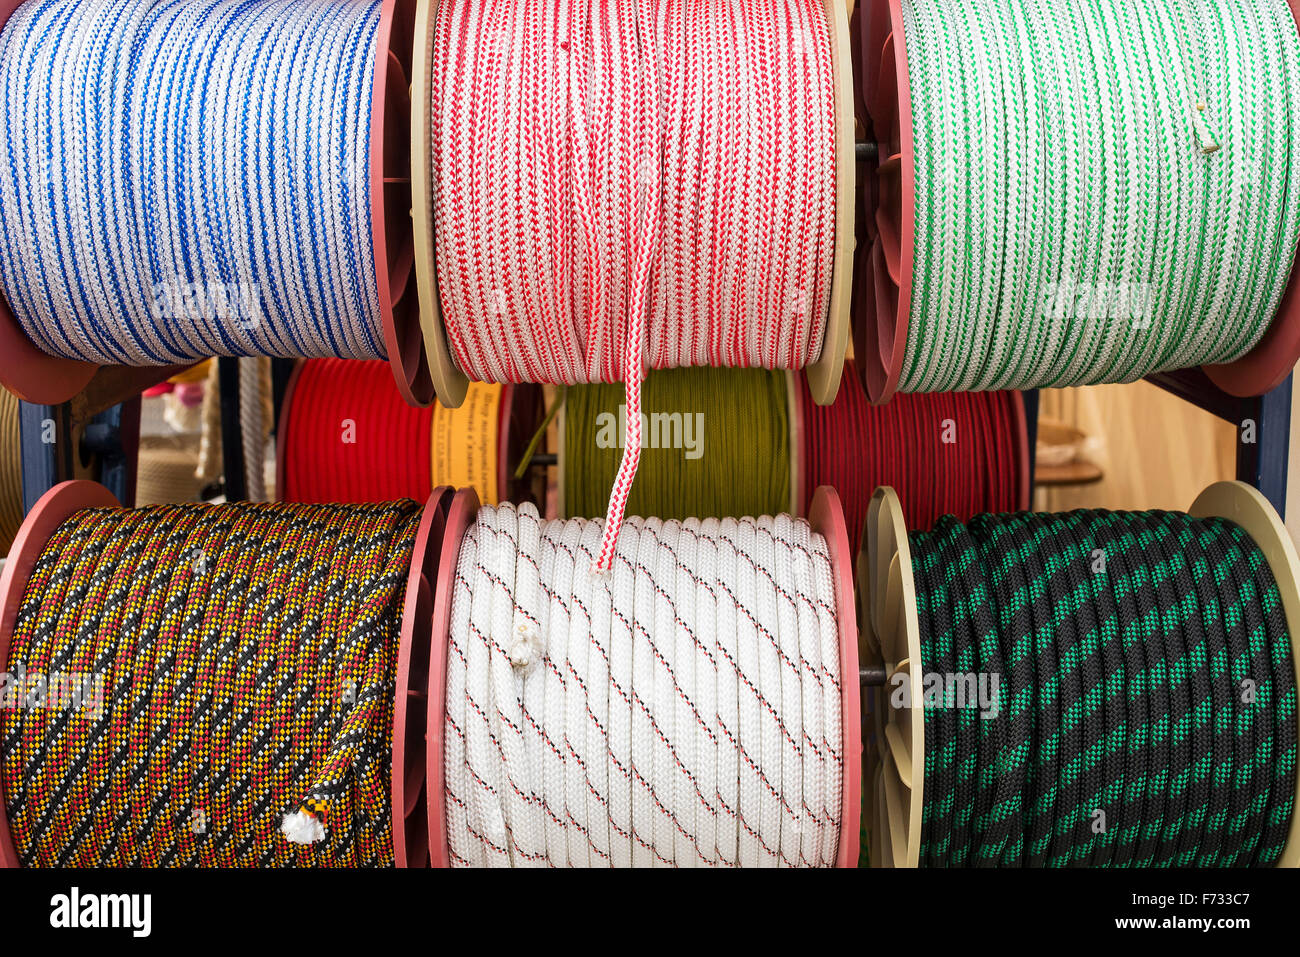 several coils of rope Stock Photo